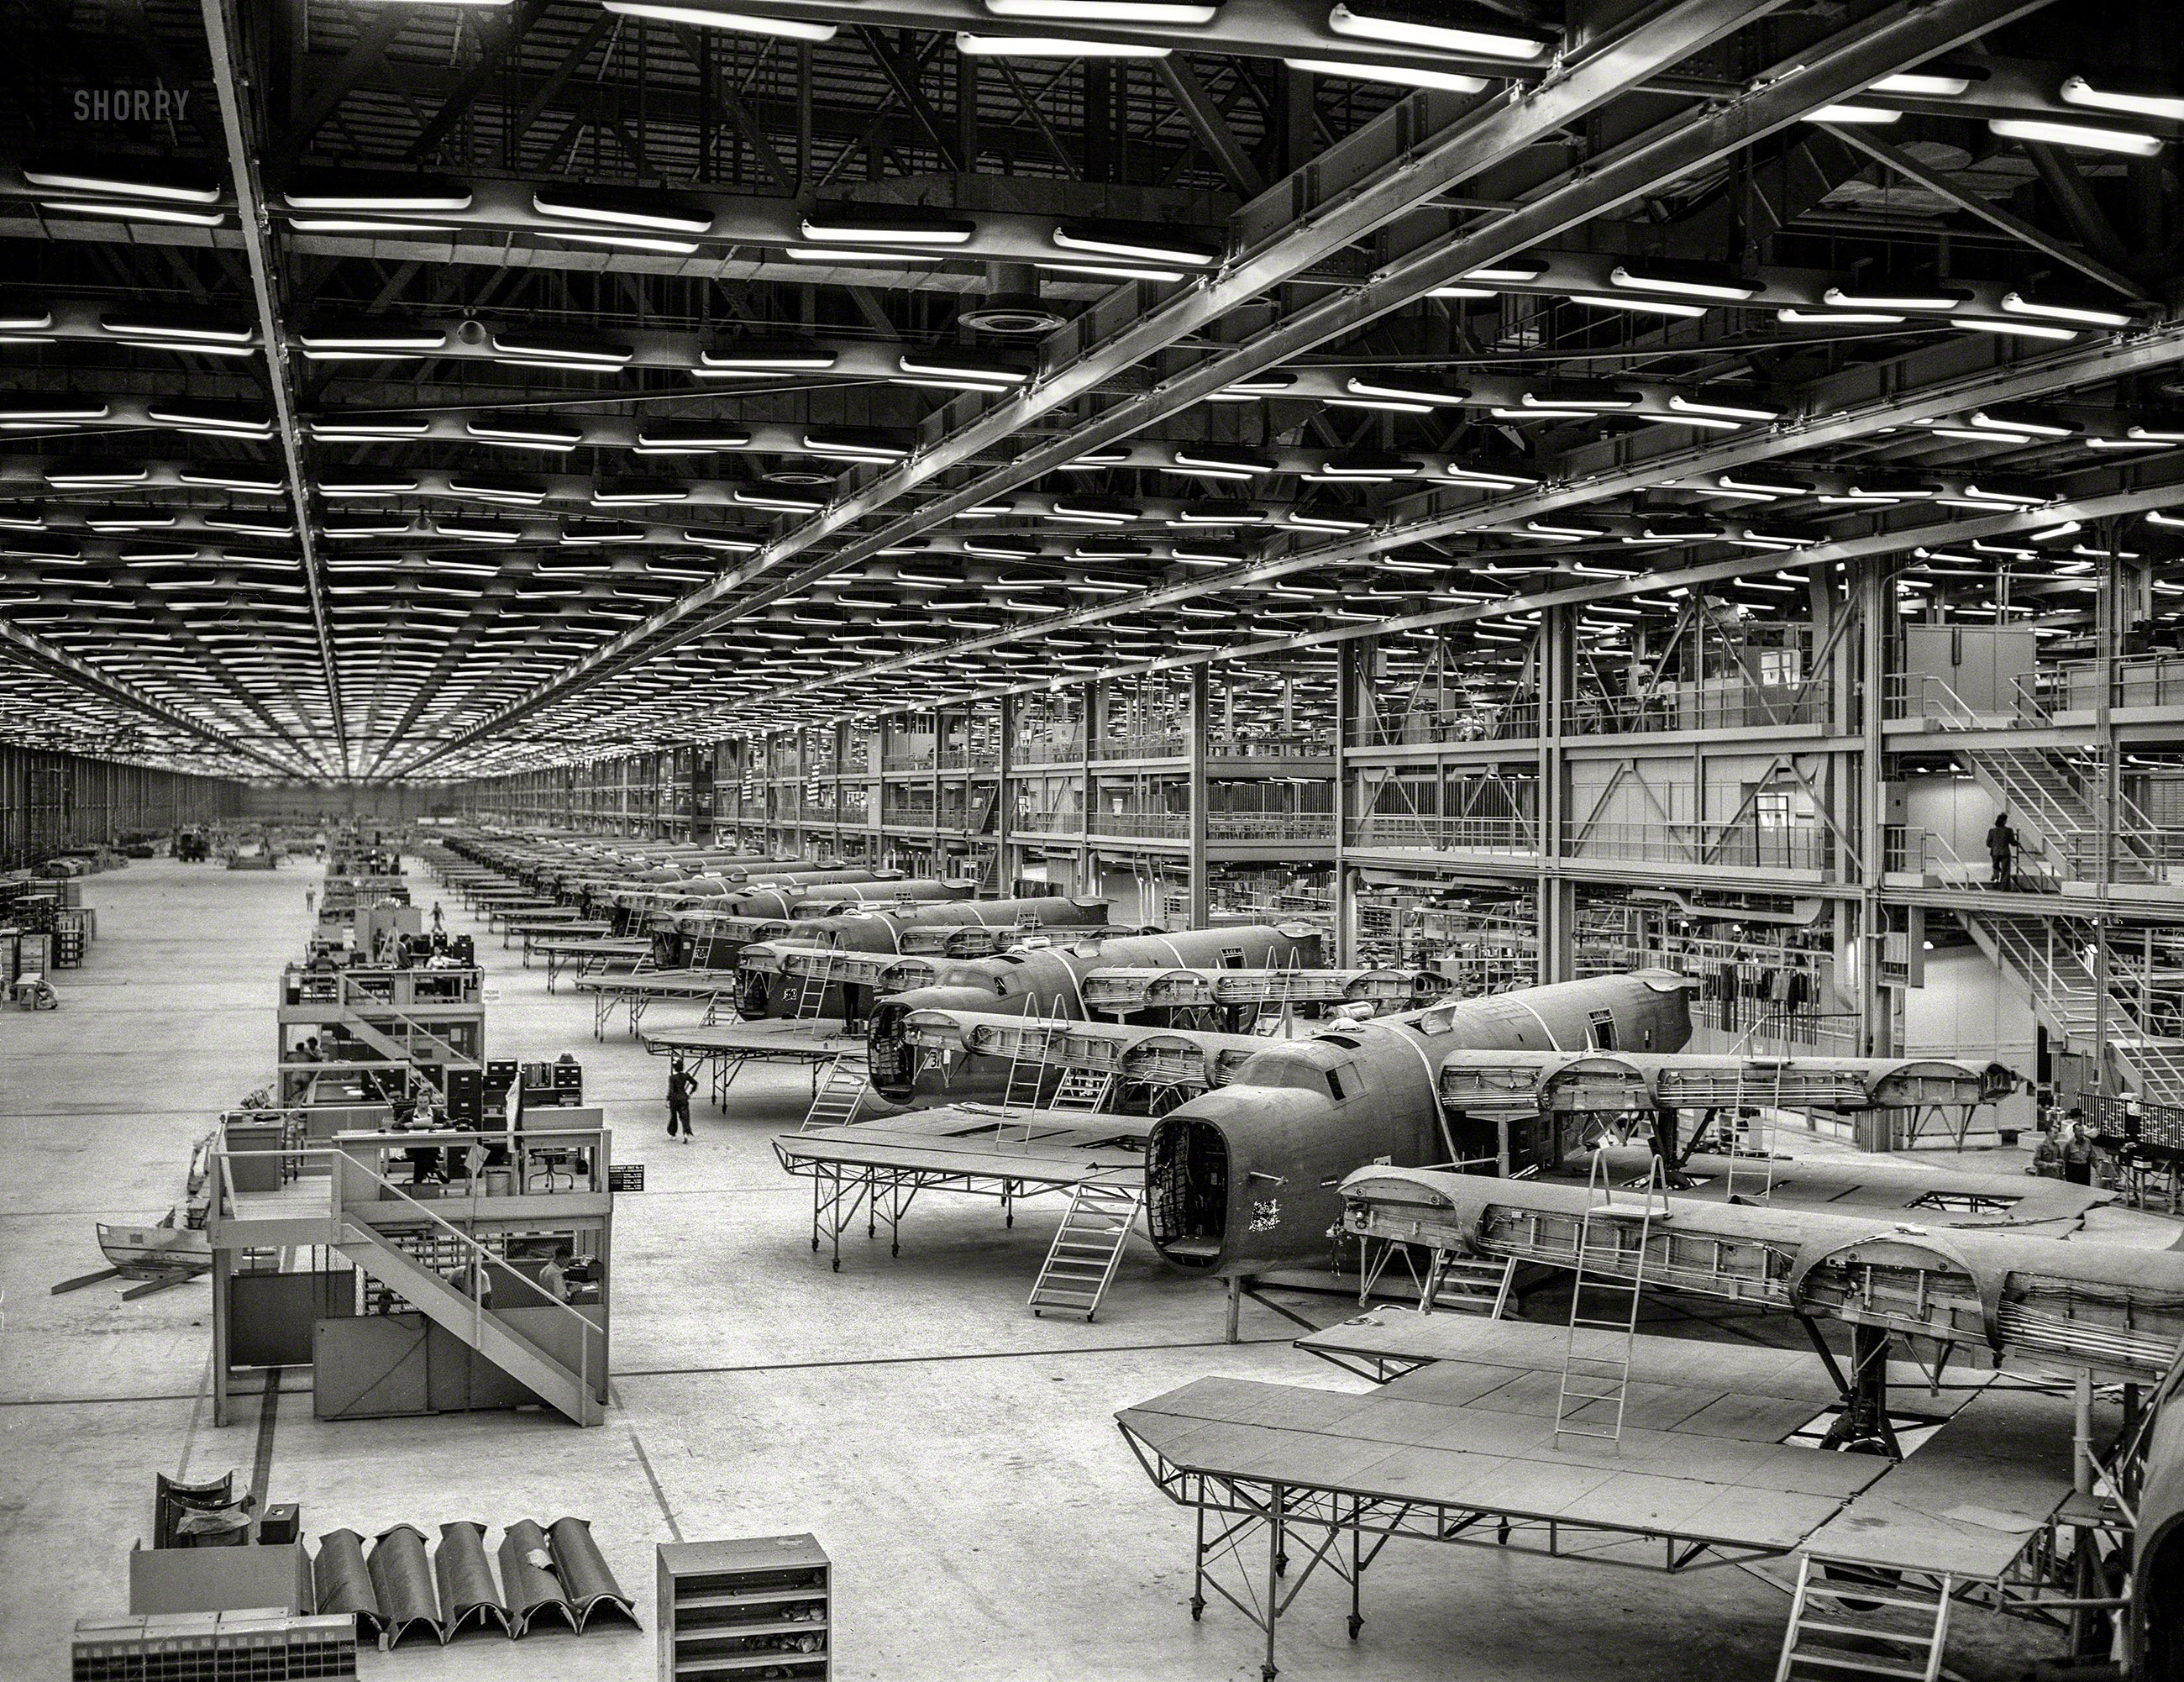 October 1942. The Consolidated Aircraft Corp. plant in Fort Worth, Texas. "Production. Halfway down the final line of a Western aircraft plant at which B-24 bombers and C-87 transports are made. This new transport, an adaptation of the B-24 bomber, is known as the C-87 and carries one of the greatest human or cargo loads of any plane now in mass production. It is built in a plant equipped with one of the best air conditioning and fluorescent lighting systems in the country." Photo by Howard Hollem for the Office of War Information. View full size.